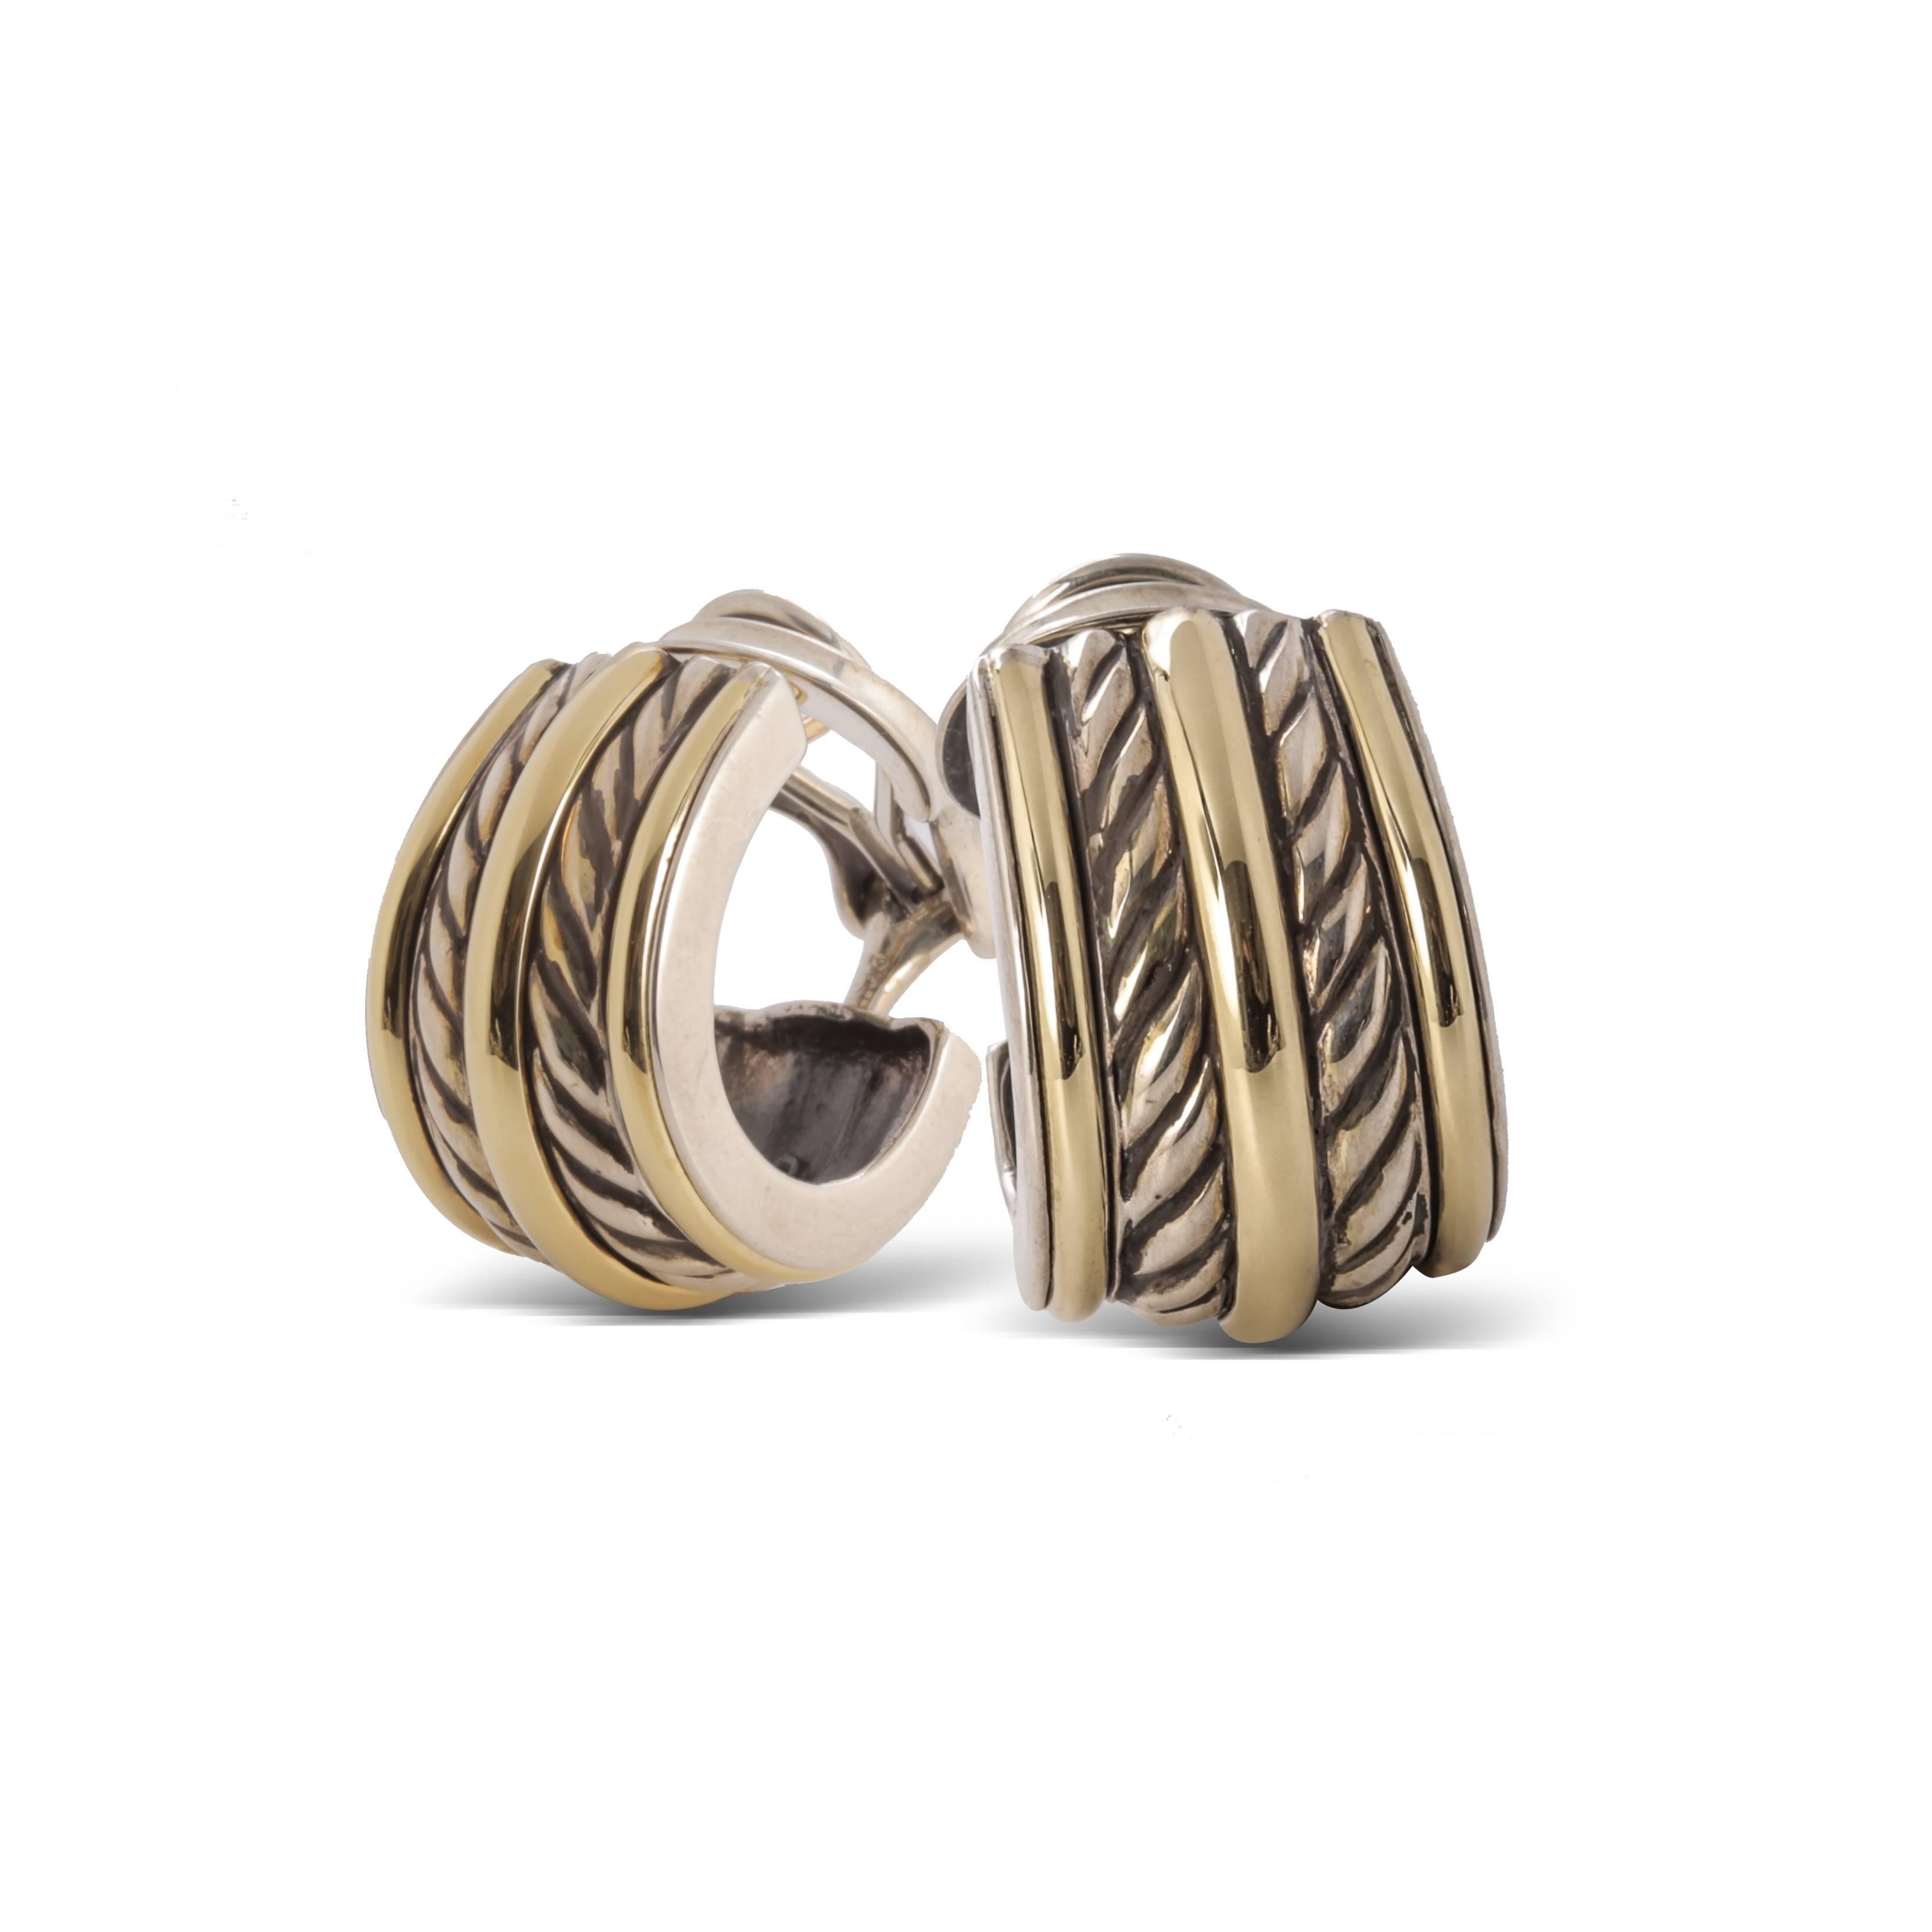 Previously loved 18 karat yellow gold and sterling silver David Yurman cable huggie earrings featuring two rows of cable with omega back closures.
